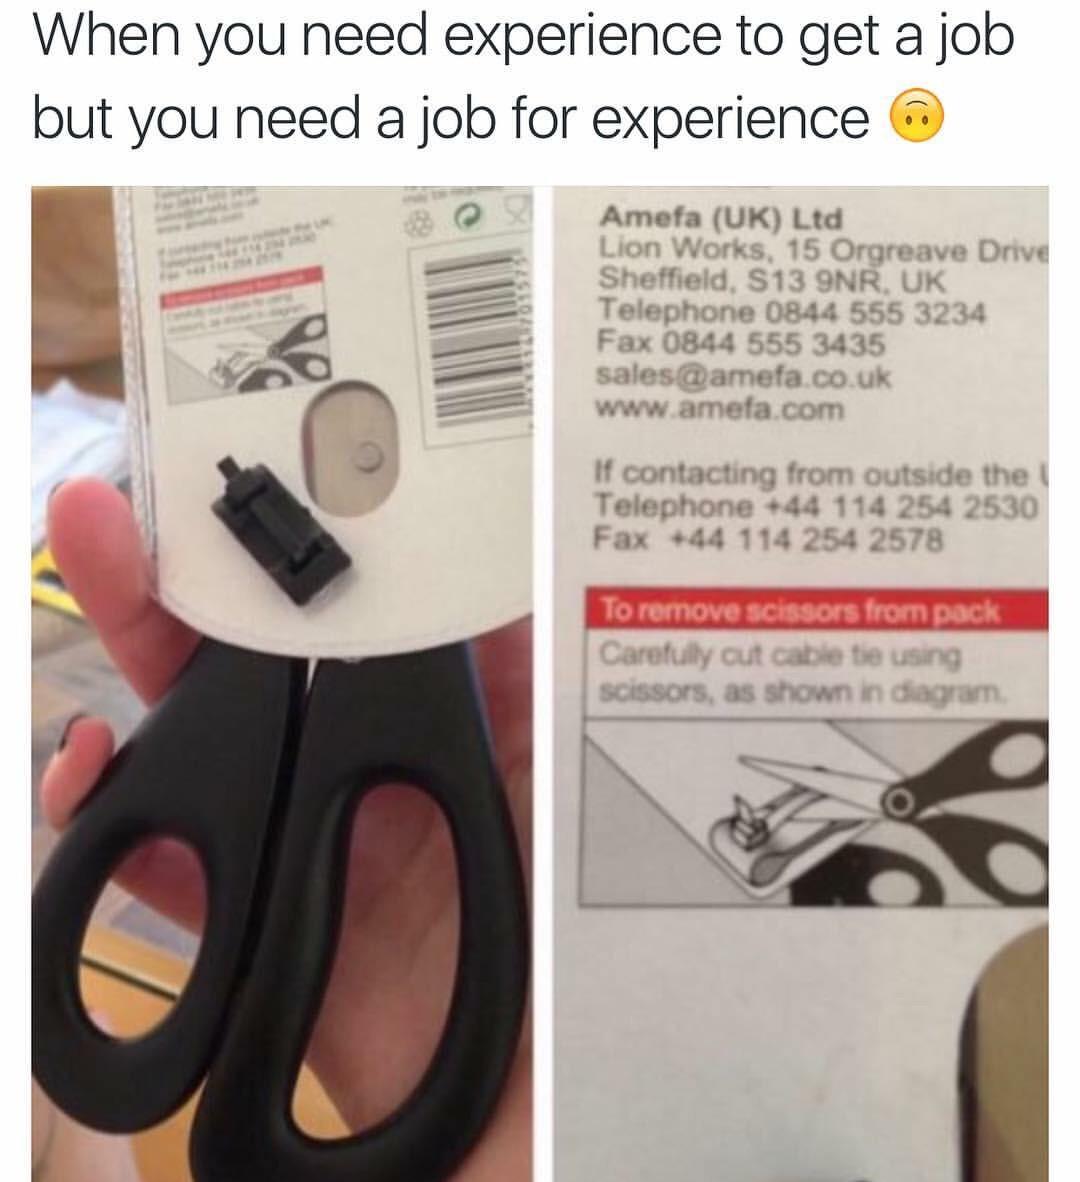 memes - scissor experience meme - When you need experience to get a job but you need a job for experience Us Amefa Uk Ltd Lion Works, 15 Orgreave Drive Sheffield, S13 9NR, Uk Telephone 0844 555 3234 Fax 0844 555 3435 sales.co.uk If contacting from outside